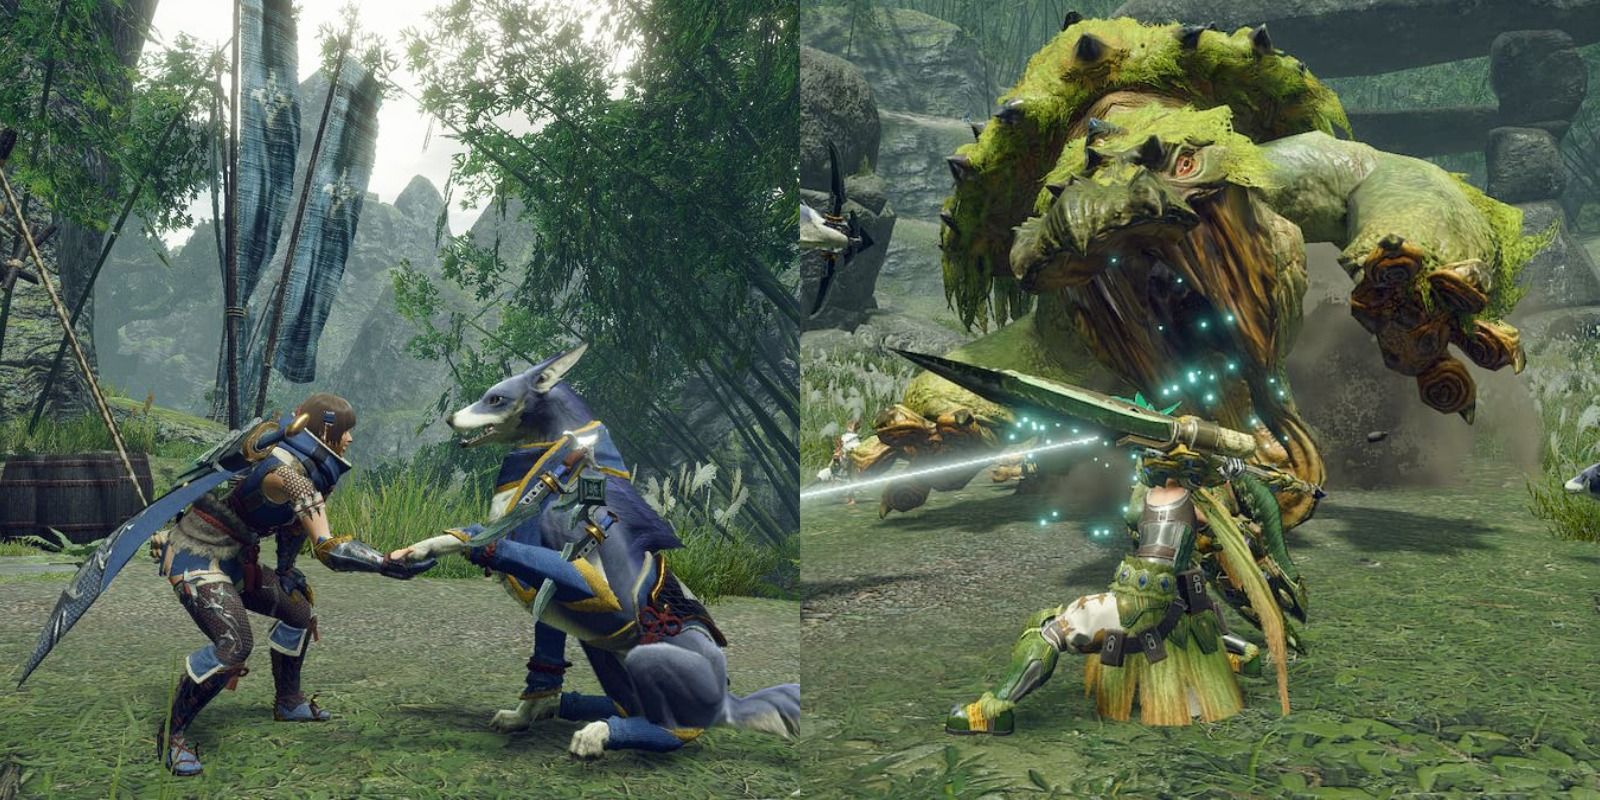 Is Monster Hunter Rise Worth It? 5 Pros & 5 Cons Of The Game